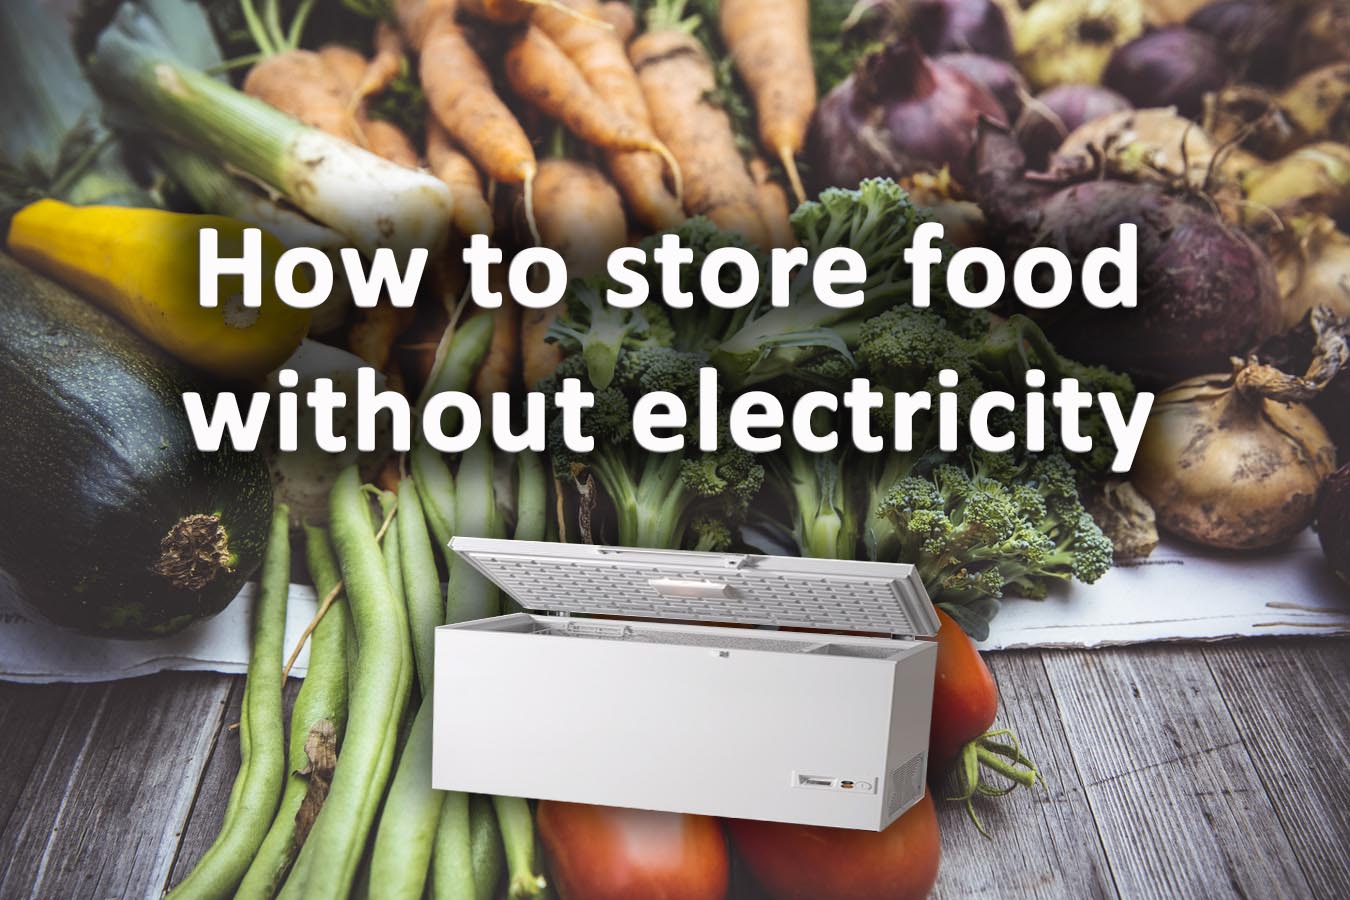 https://www.selfsufficienthomesteading.com/wp-content/uploads/2021/03/How-to-store-food-without-electricity.jpg